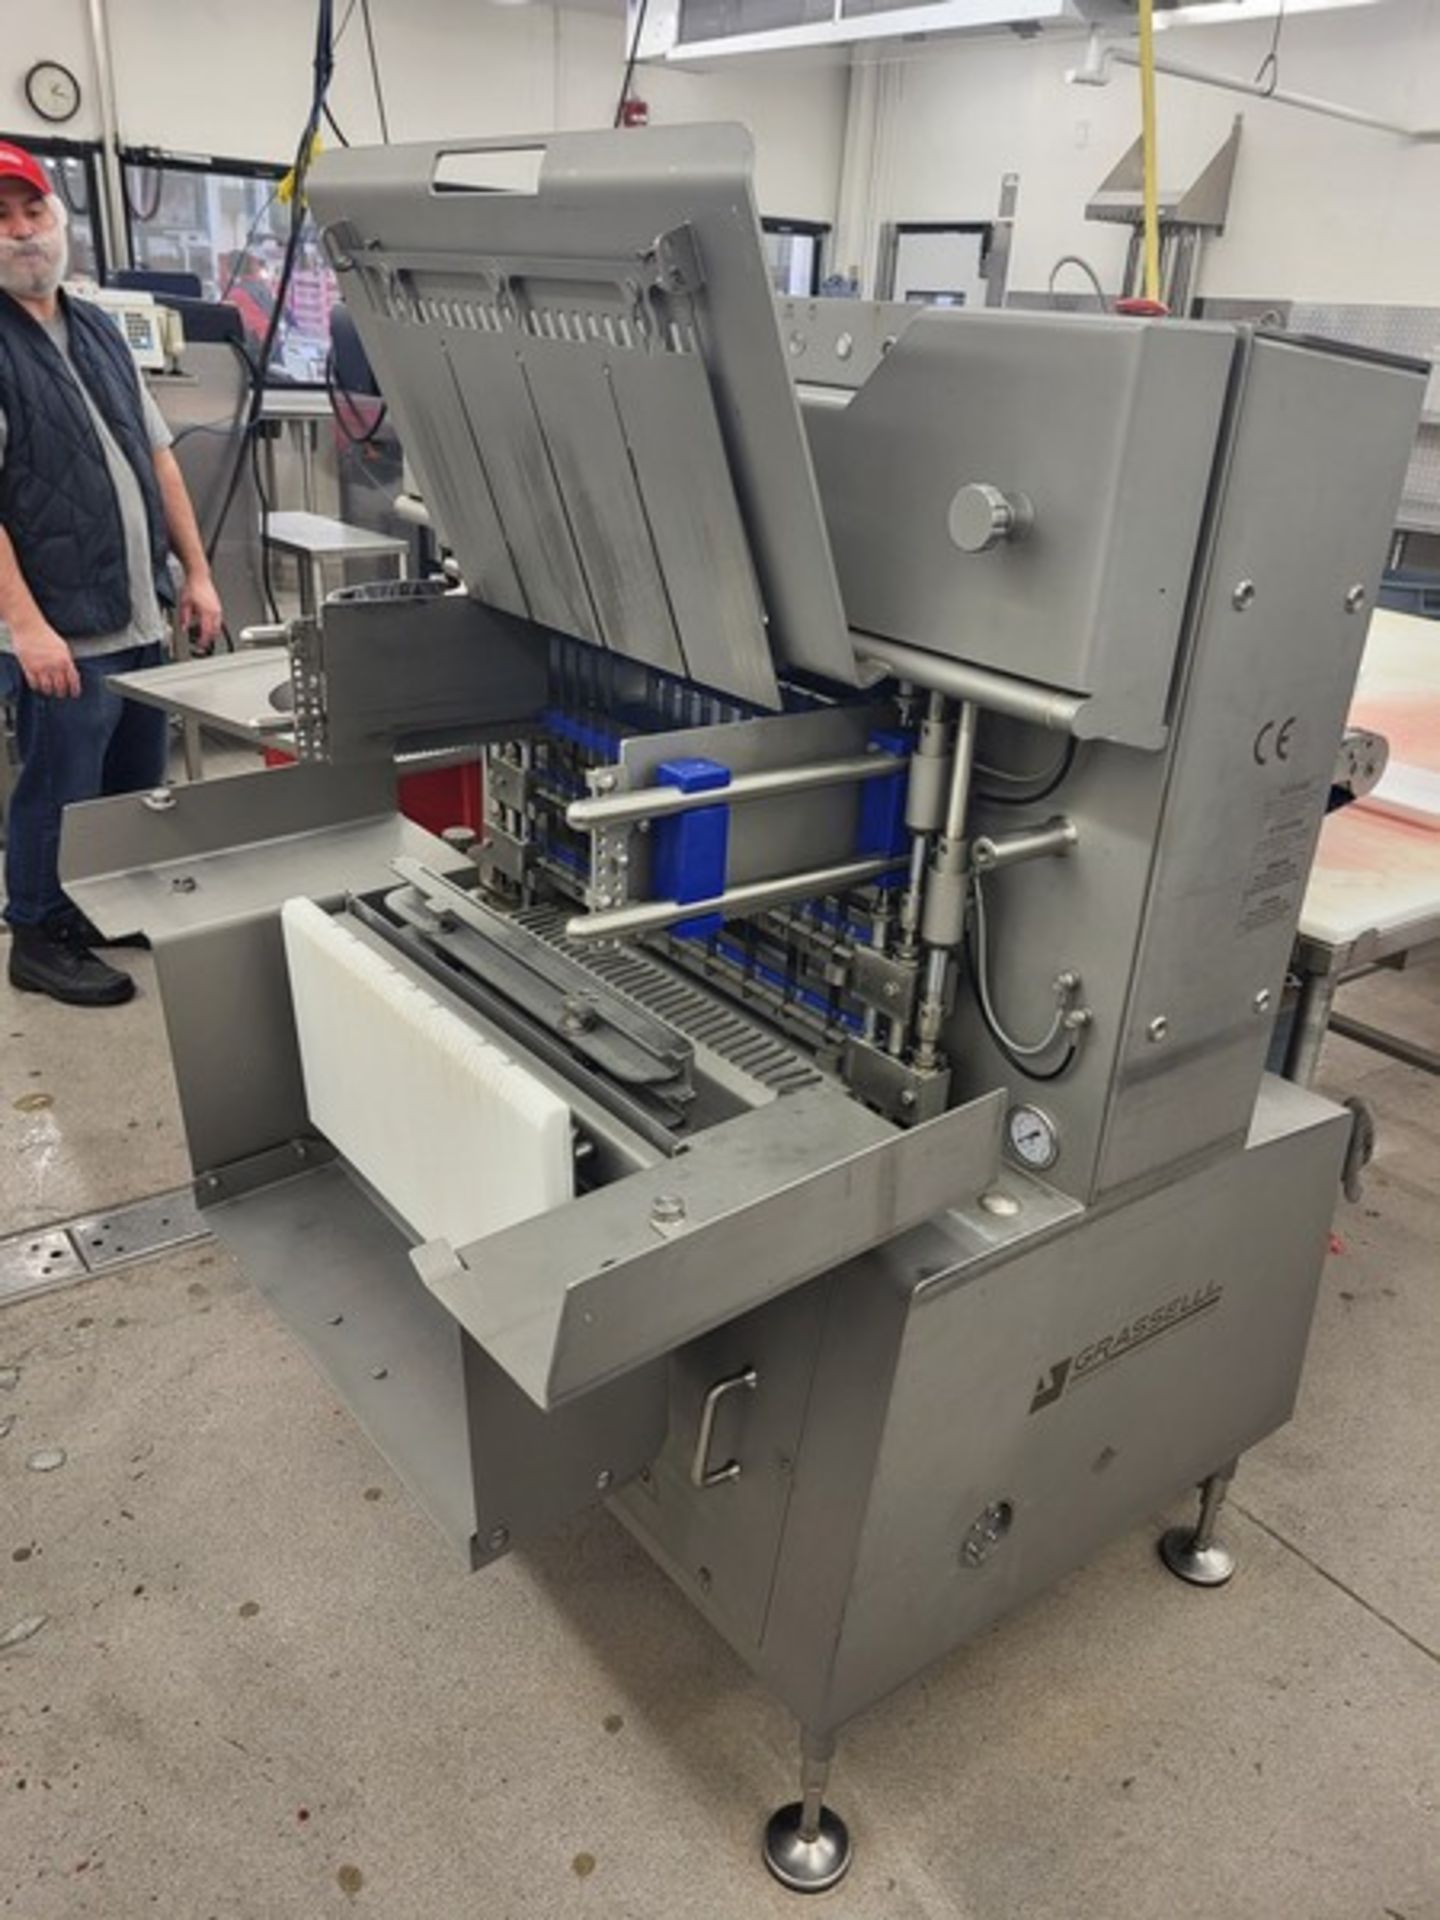 Grasselli Vertical Meat Slicer, Model NSL600 (2013), 208 Volts, 3 Phase for Obtaining Perfectly Even